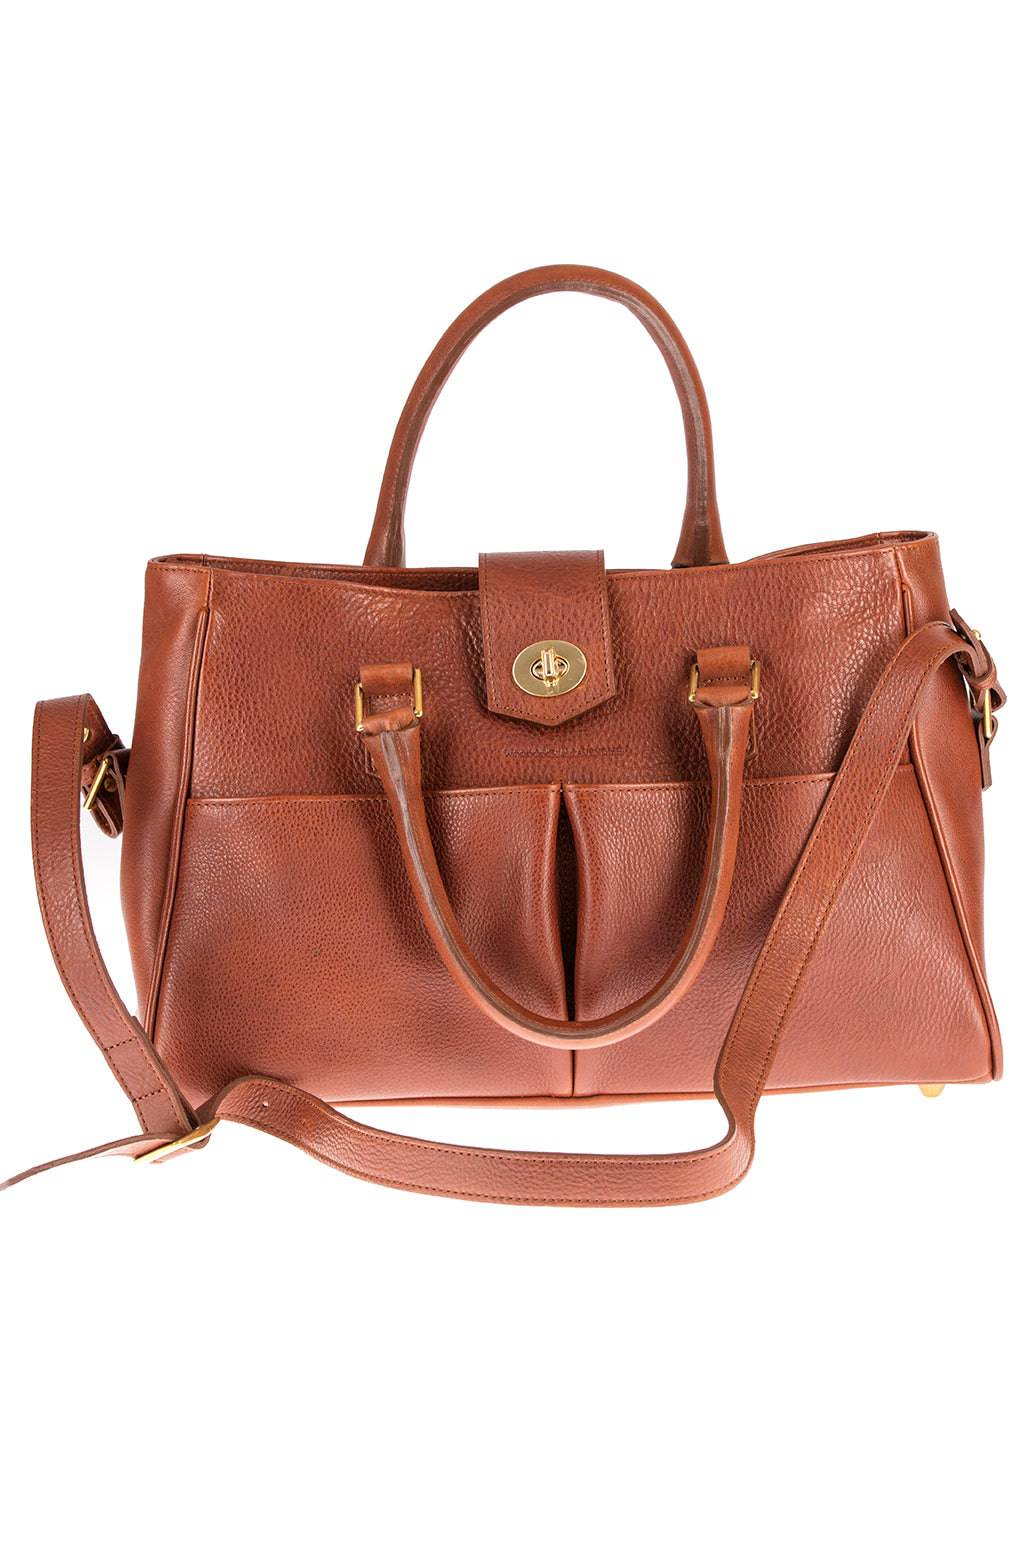 Cadogan Tote Bag in Chestnut Tan Leather by Woodcock & Cavendish for sale - Woodcock and Cavendish